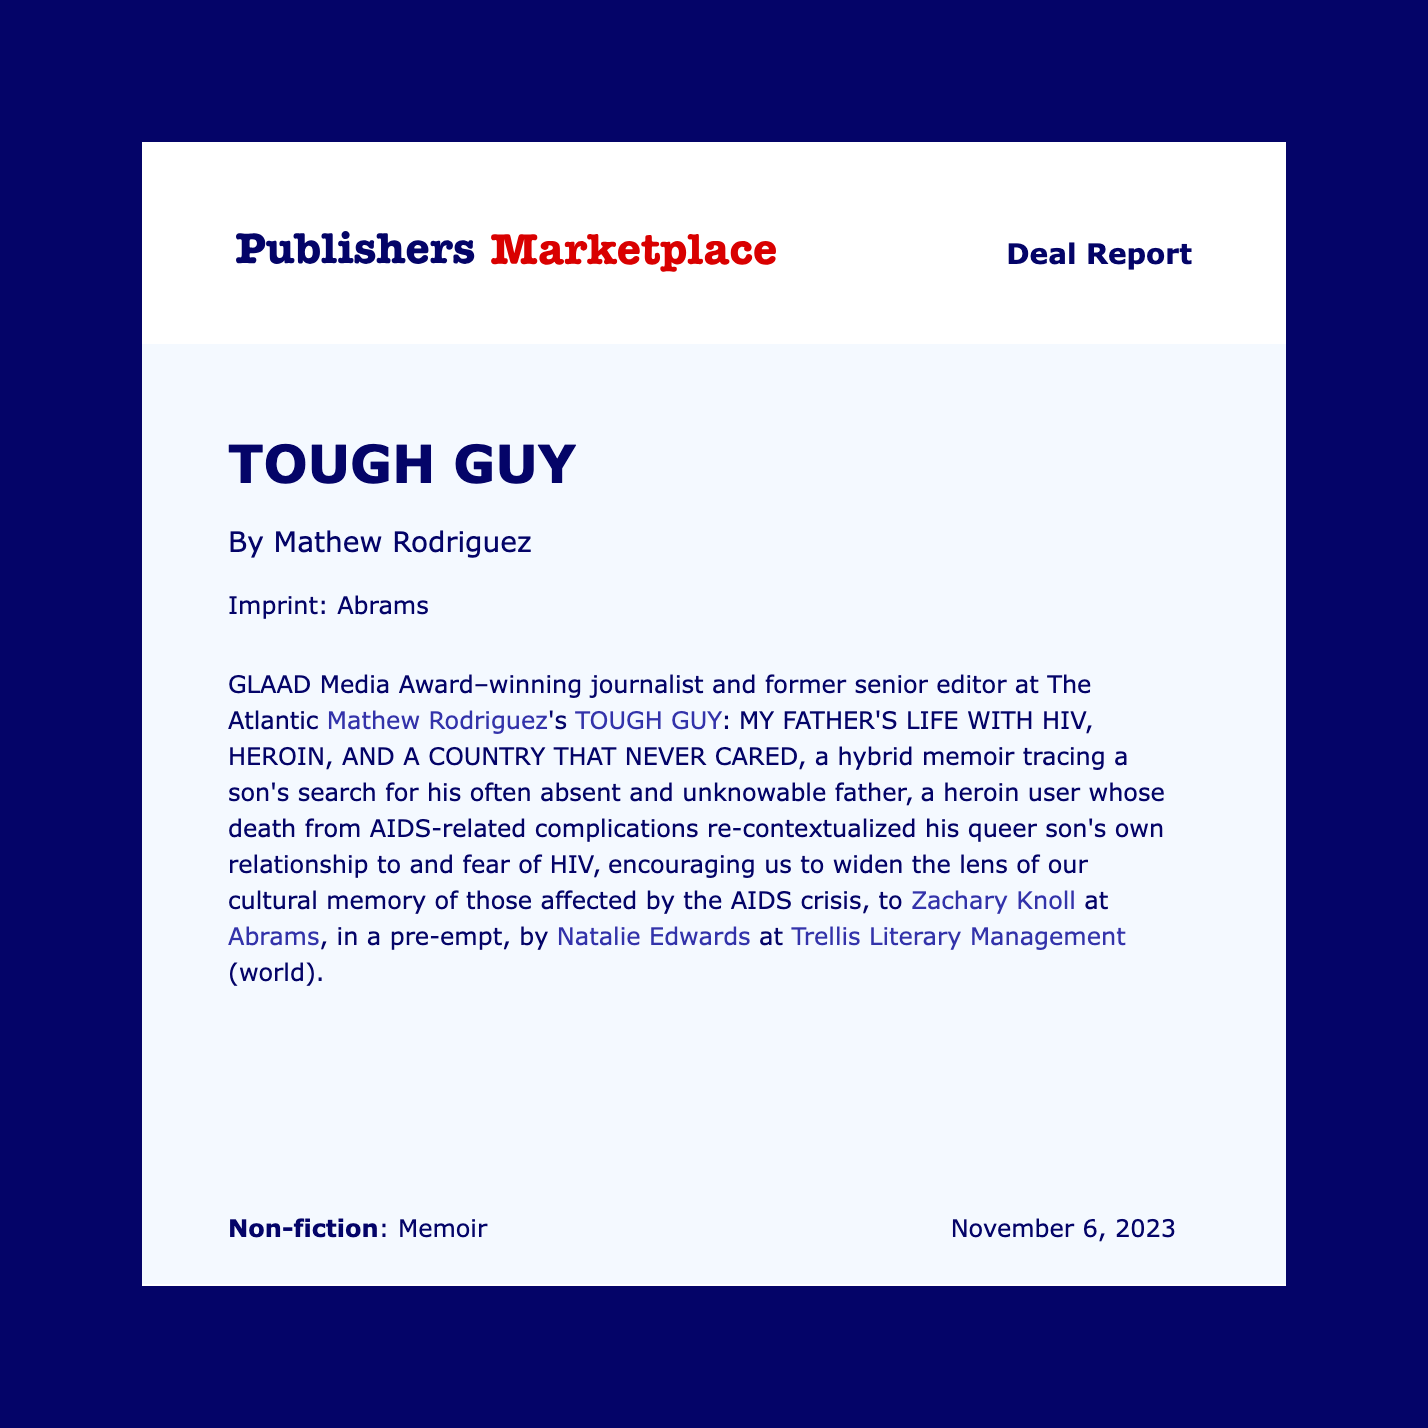 Tough guy deal report release - read text below for more.